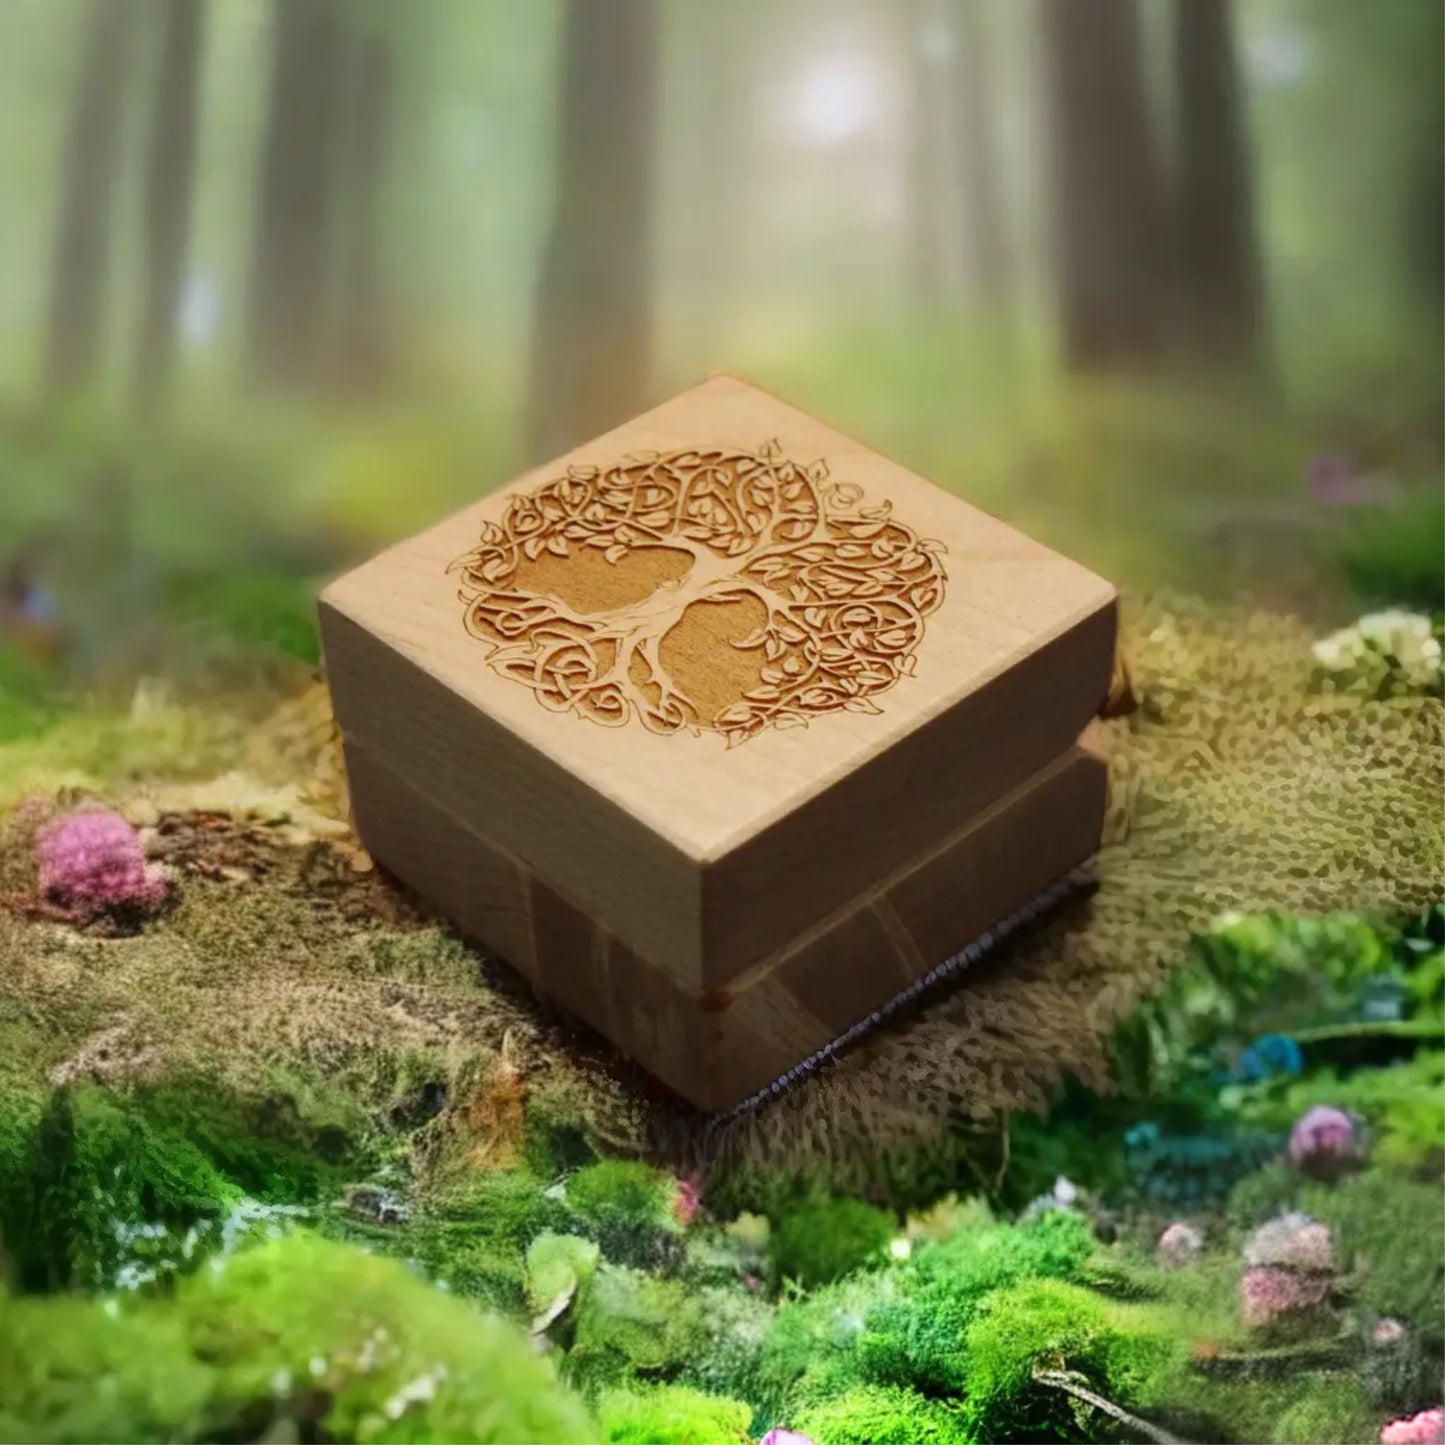 Handcrafted Maple Ring  Box - "Tree of Life"  RB-90  Made in the U.S.